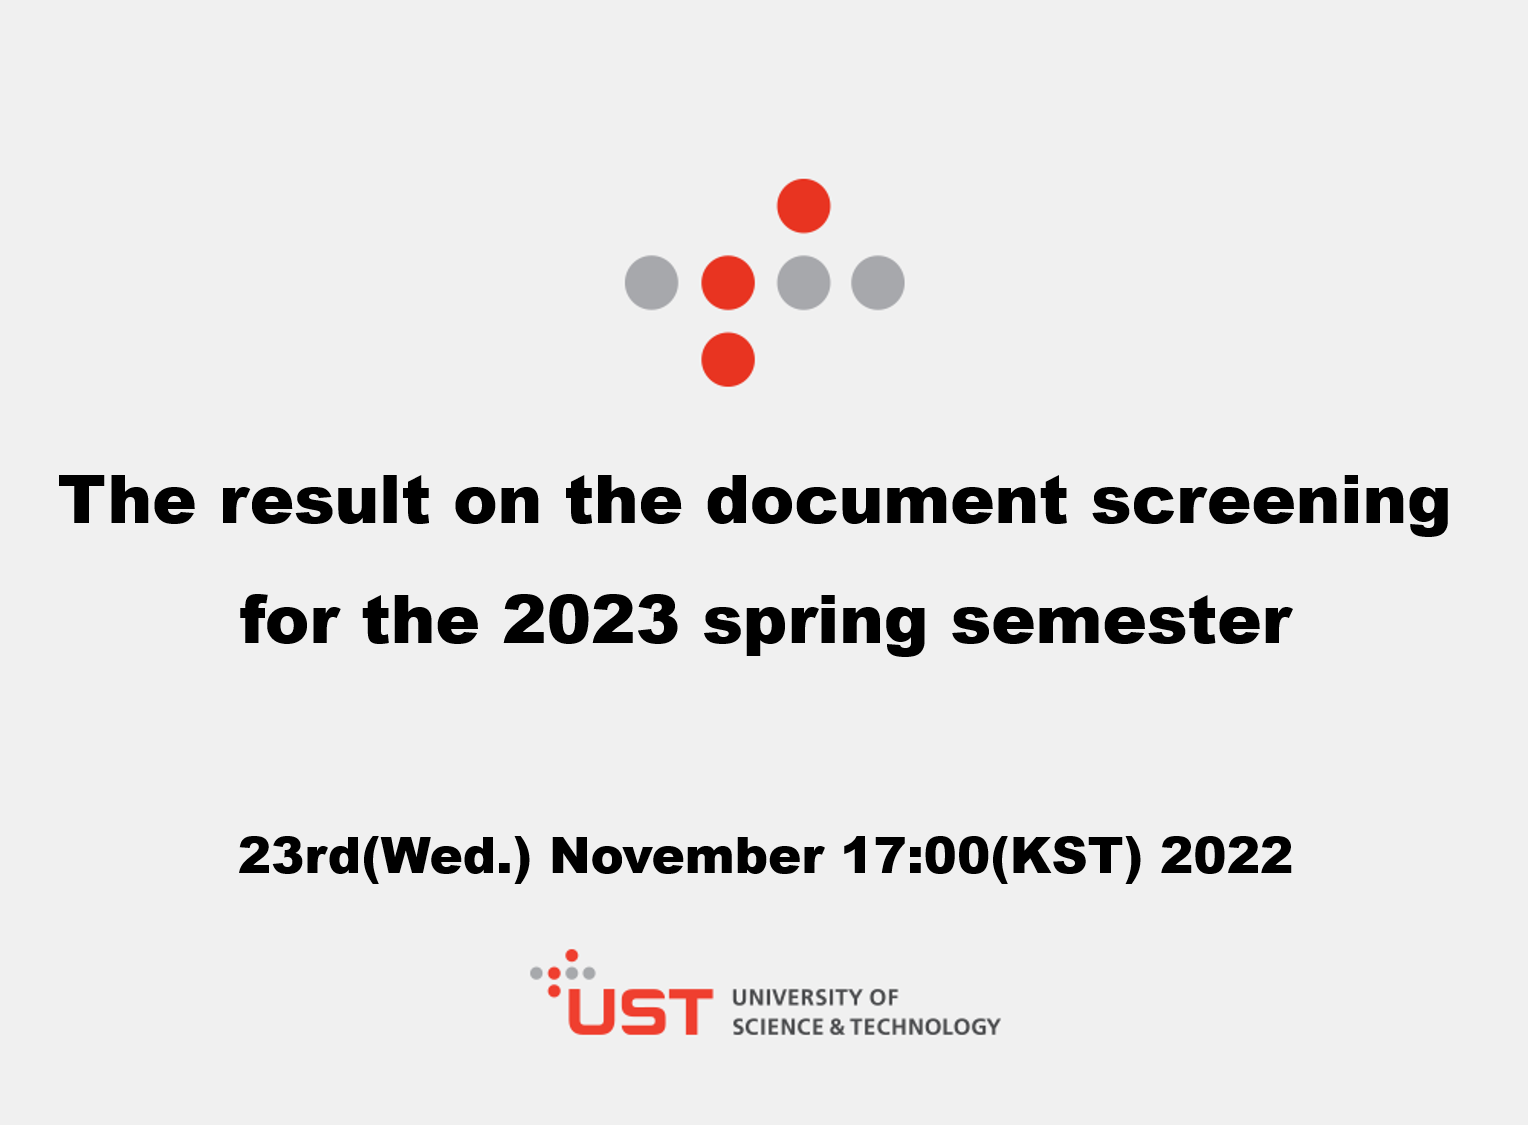 The result on the document screening for the 2023 spring semester